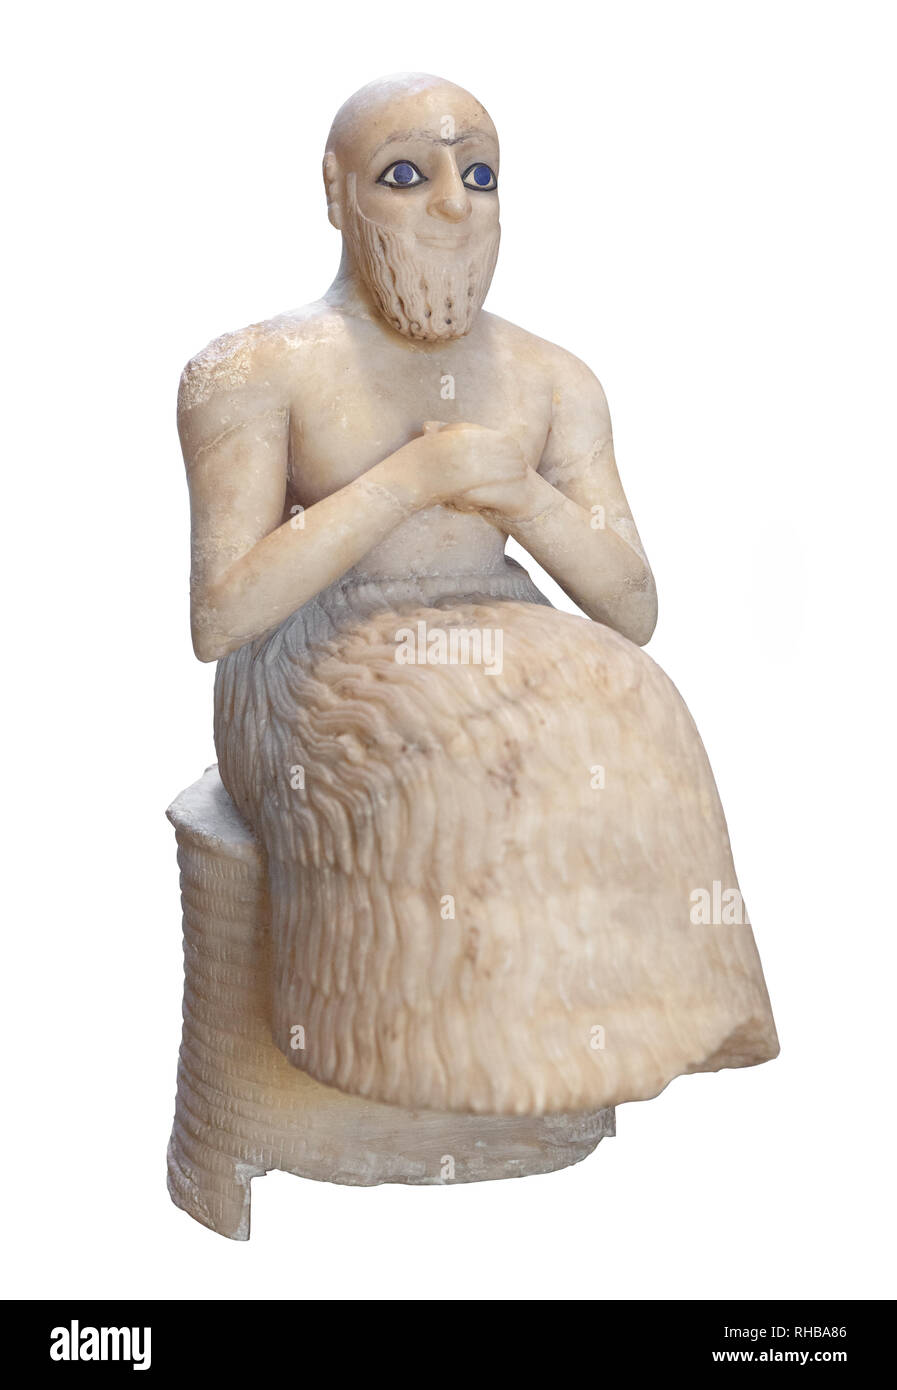 The Statue of Ebih-Il. Statue of the praying figure of Ebih-Il, superintendent of the ancient city-state of Mari in eastern Syria. Stock Photo